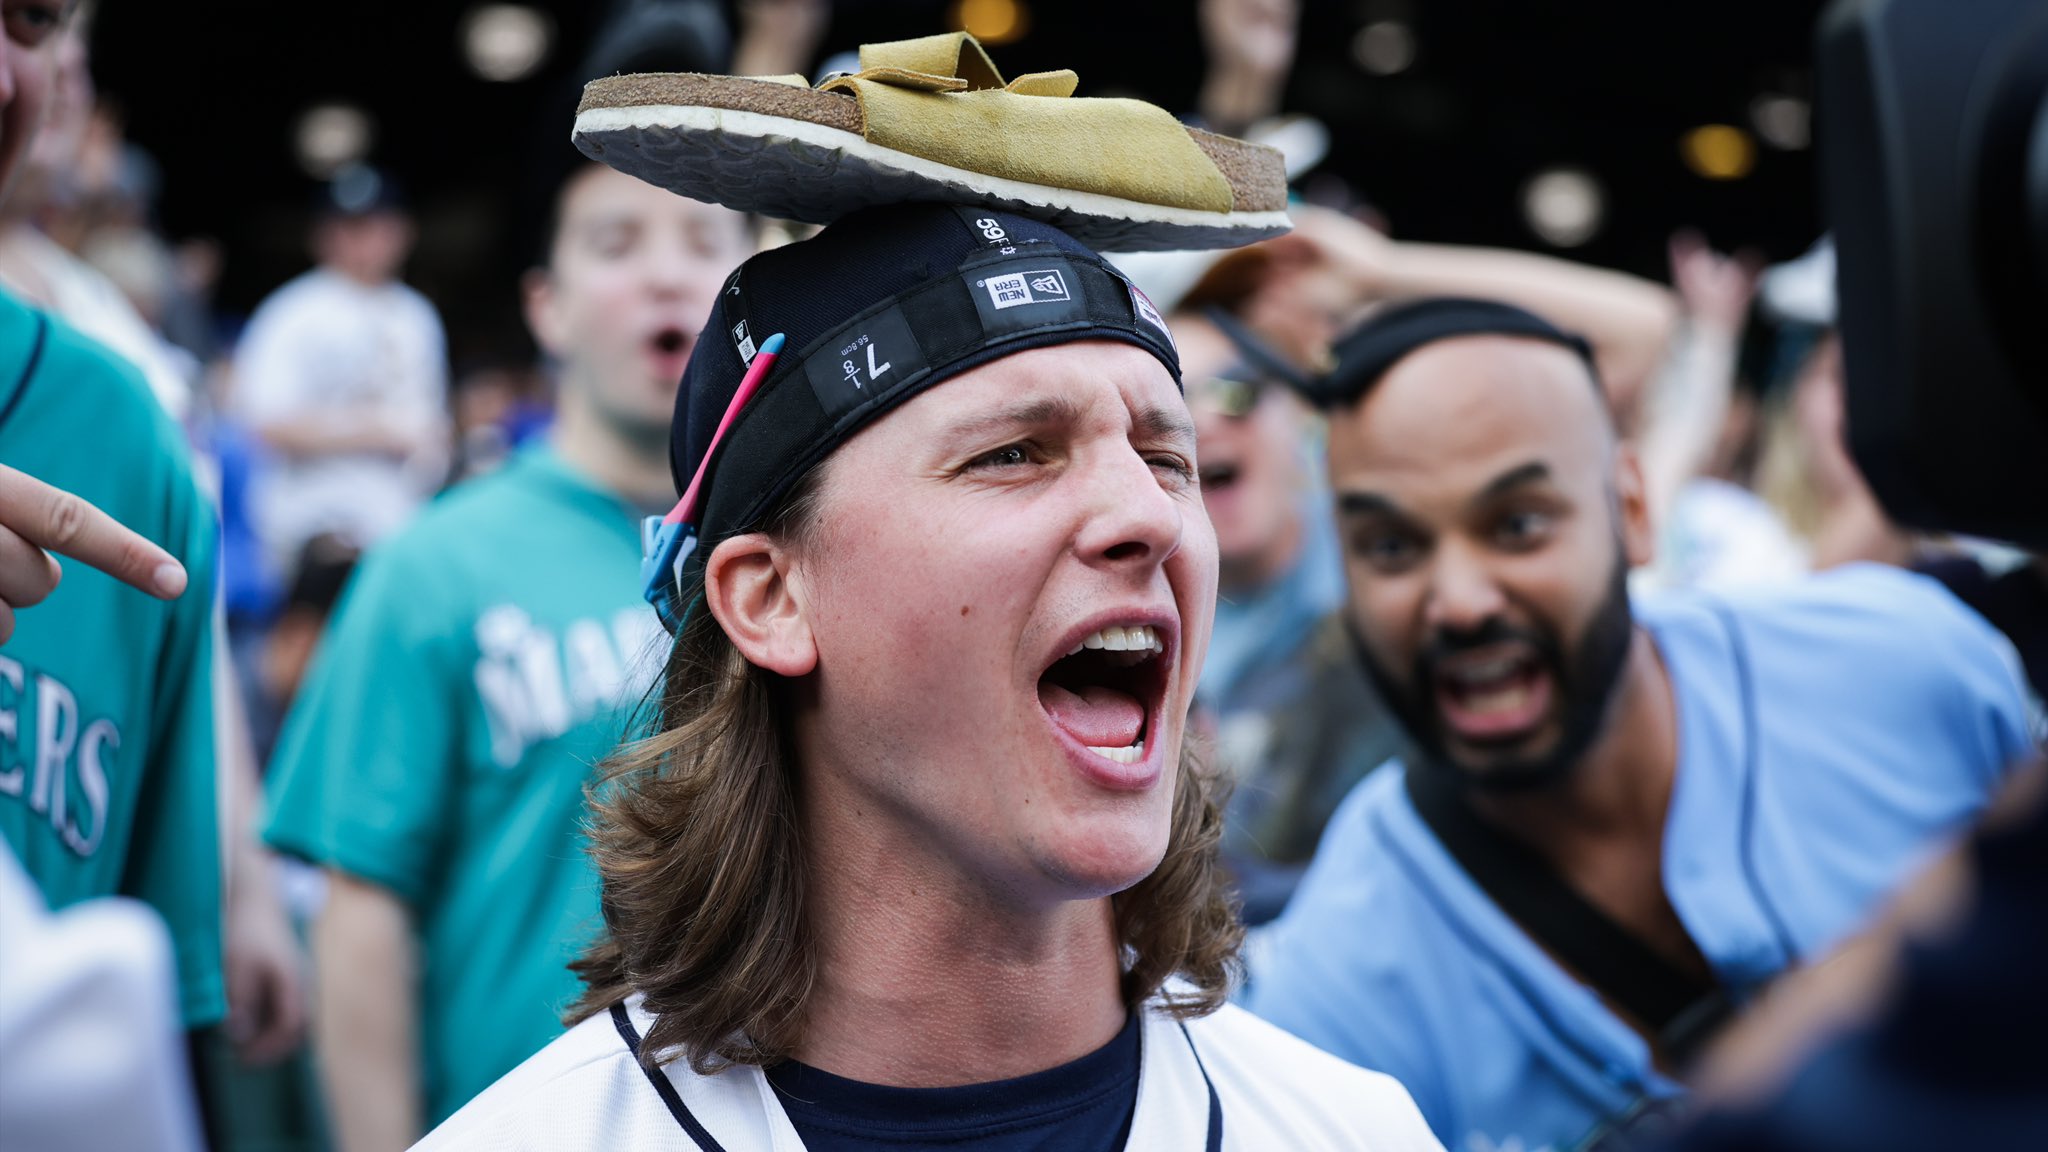 Mariners fan Ben Cox cheers with his wife’s show balanced on his head.